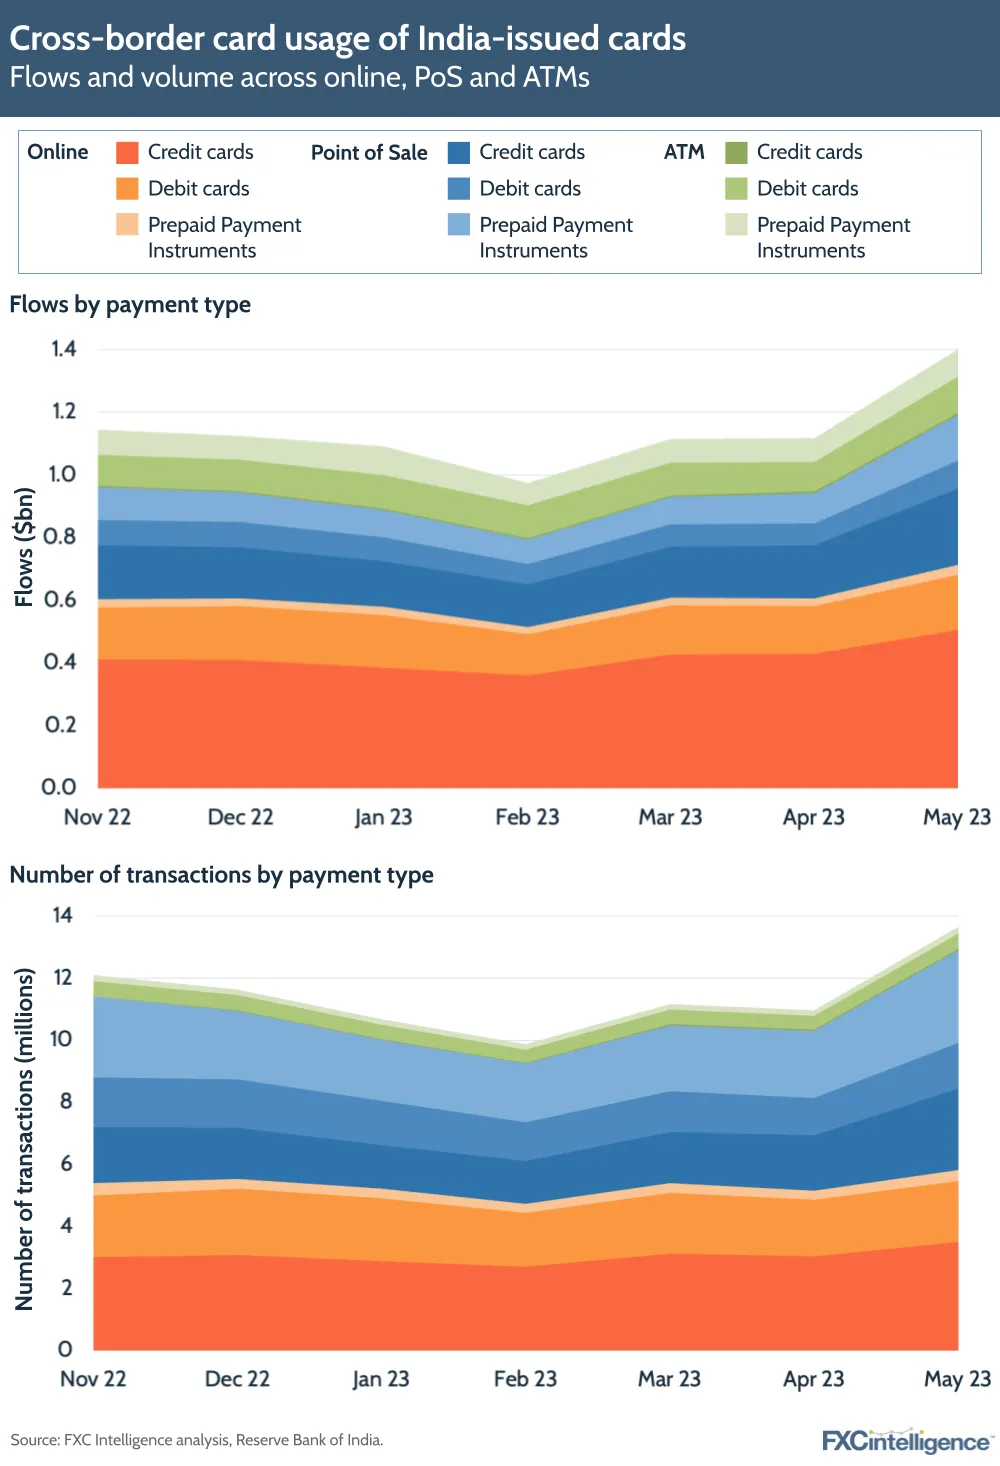 Cross-border card usage of India-issued cards
Flows and volume across online, PoS and ATMs